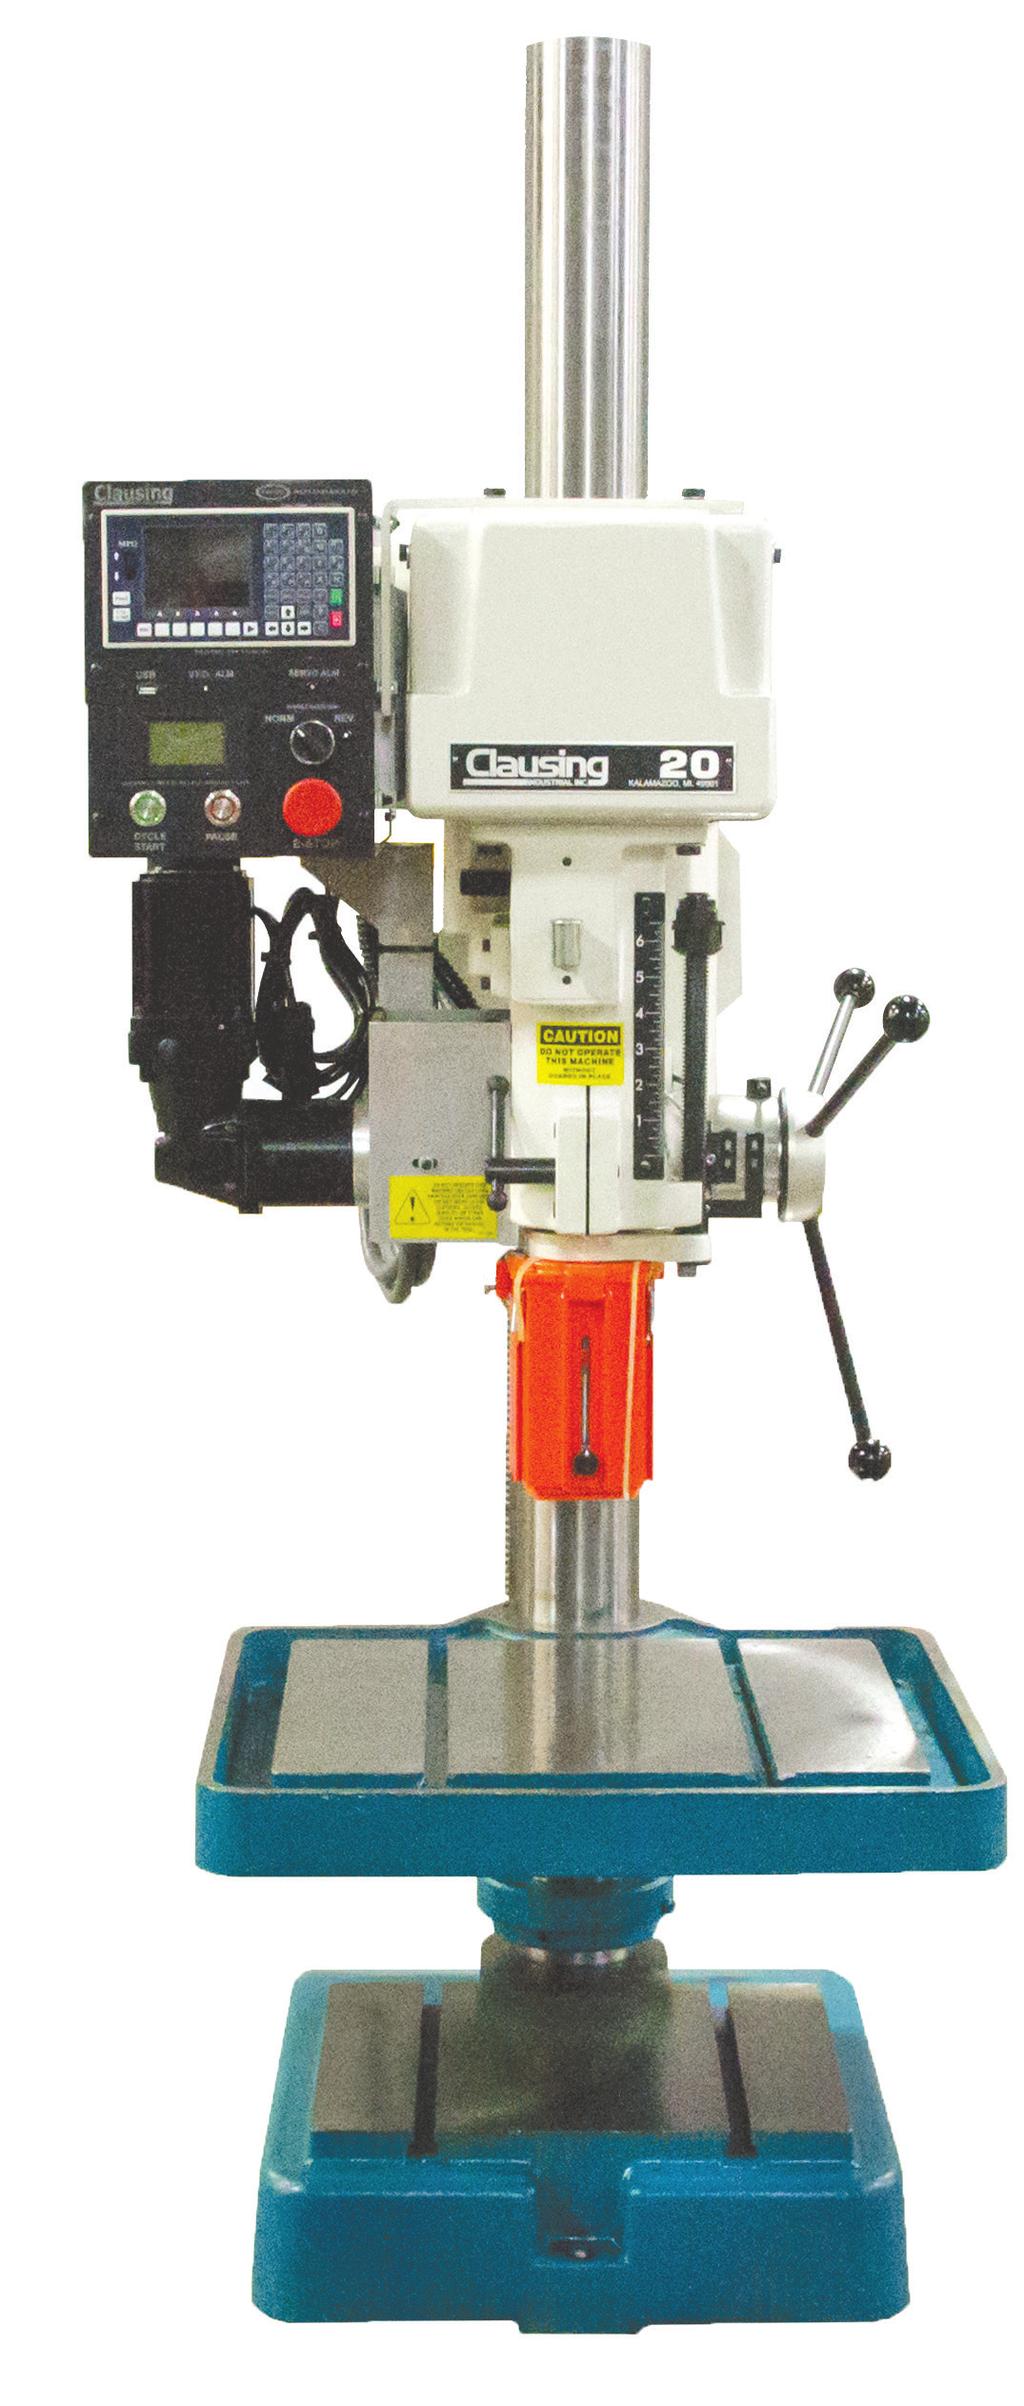 20 FLOOR DRILL PRESSES ELECTRONIC VARIABLE SPEED DRIVE FLOOR DRILL Rotate Dial left or right to adjust the best rpm for the tool and material while the job is running. LED Readout for spindle speed.